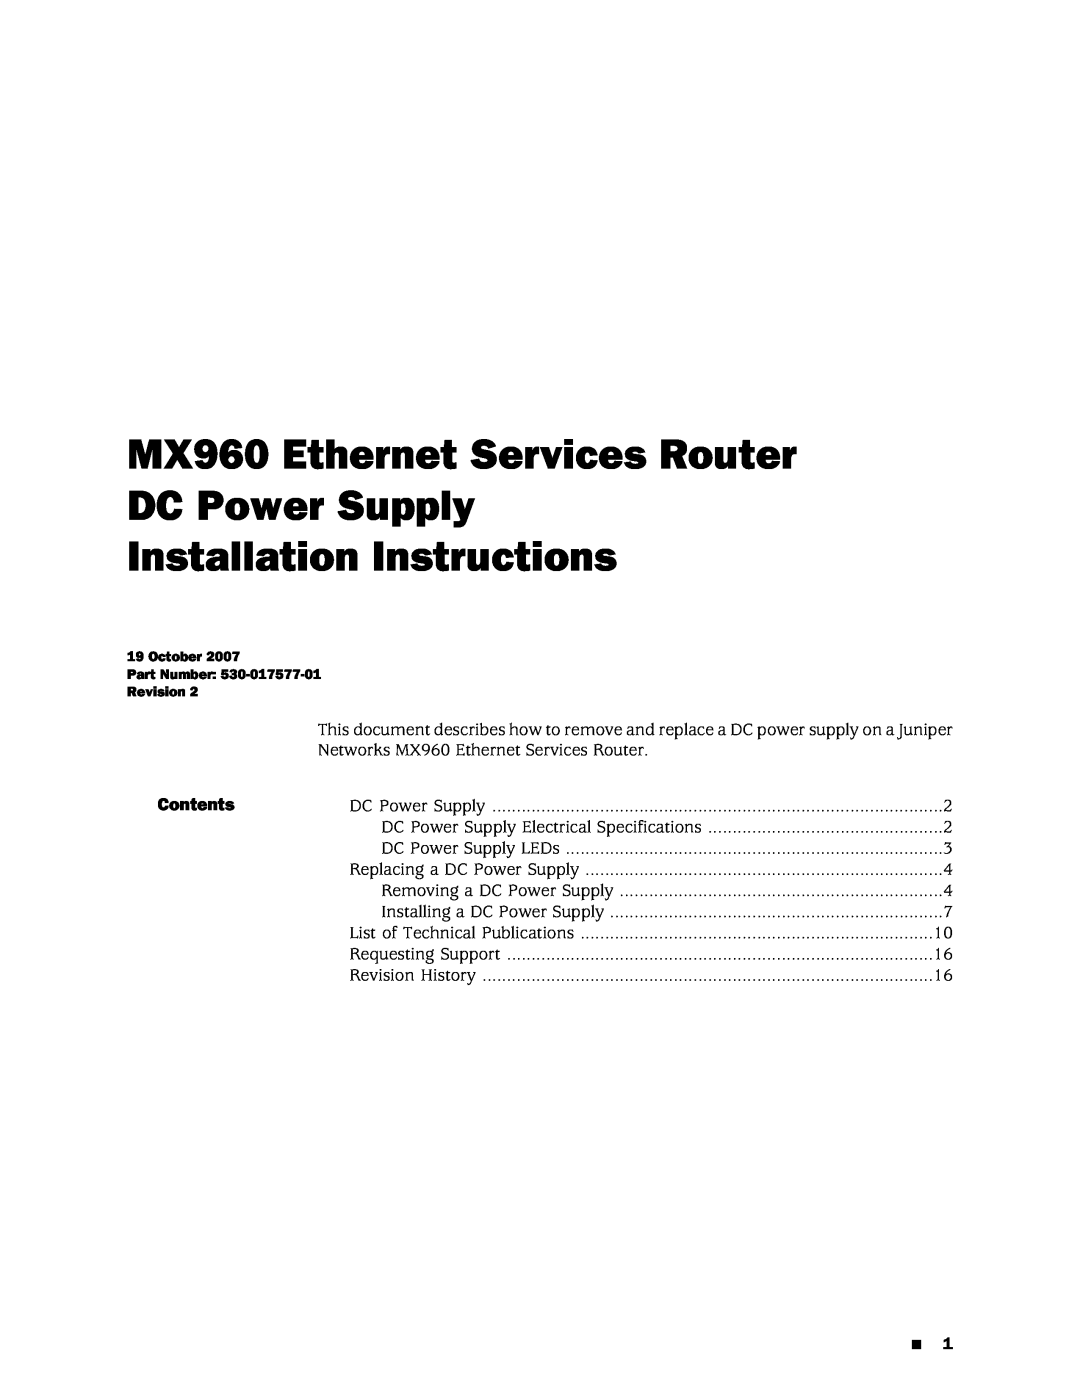 Juniper Networks installation instructions MX960 Ethernet Services Router DC Power Supply, Installation Instructions 